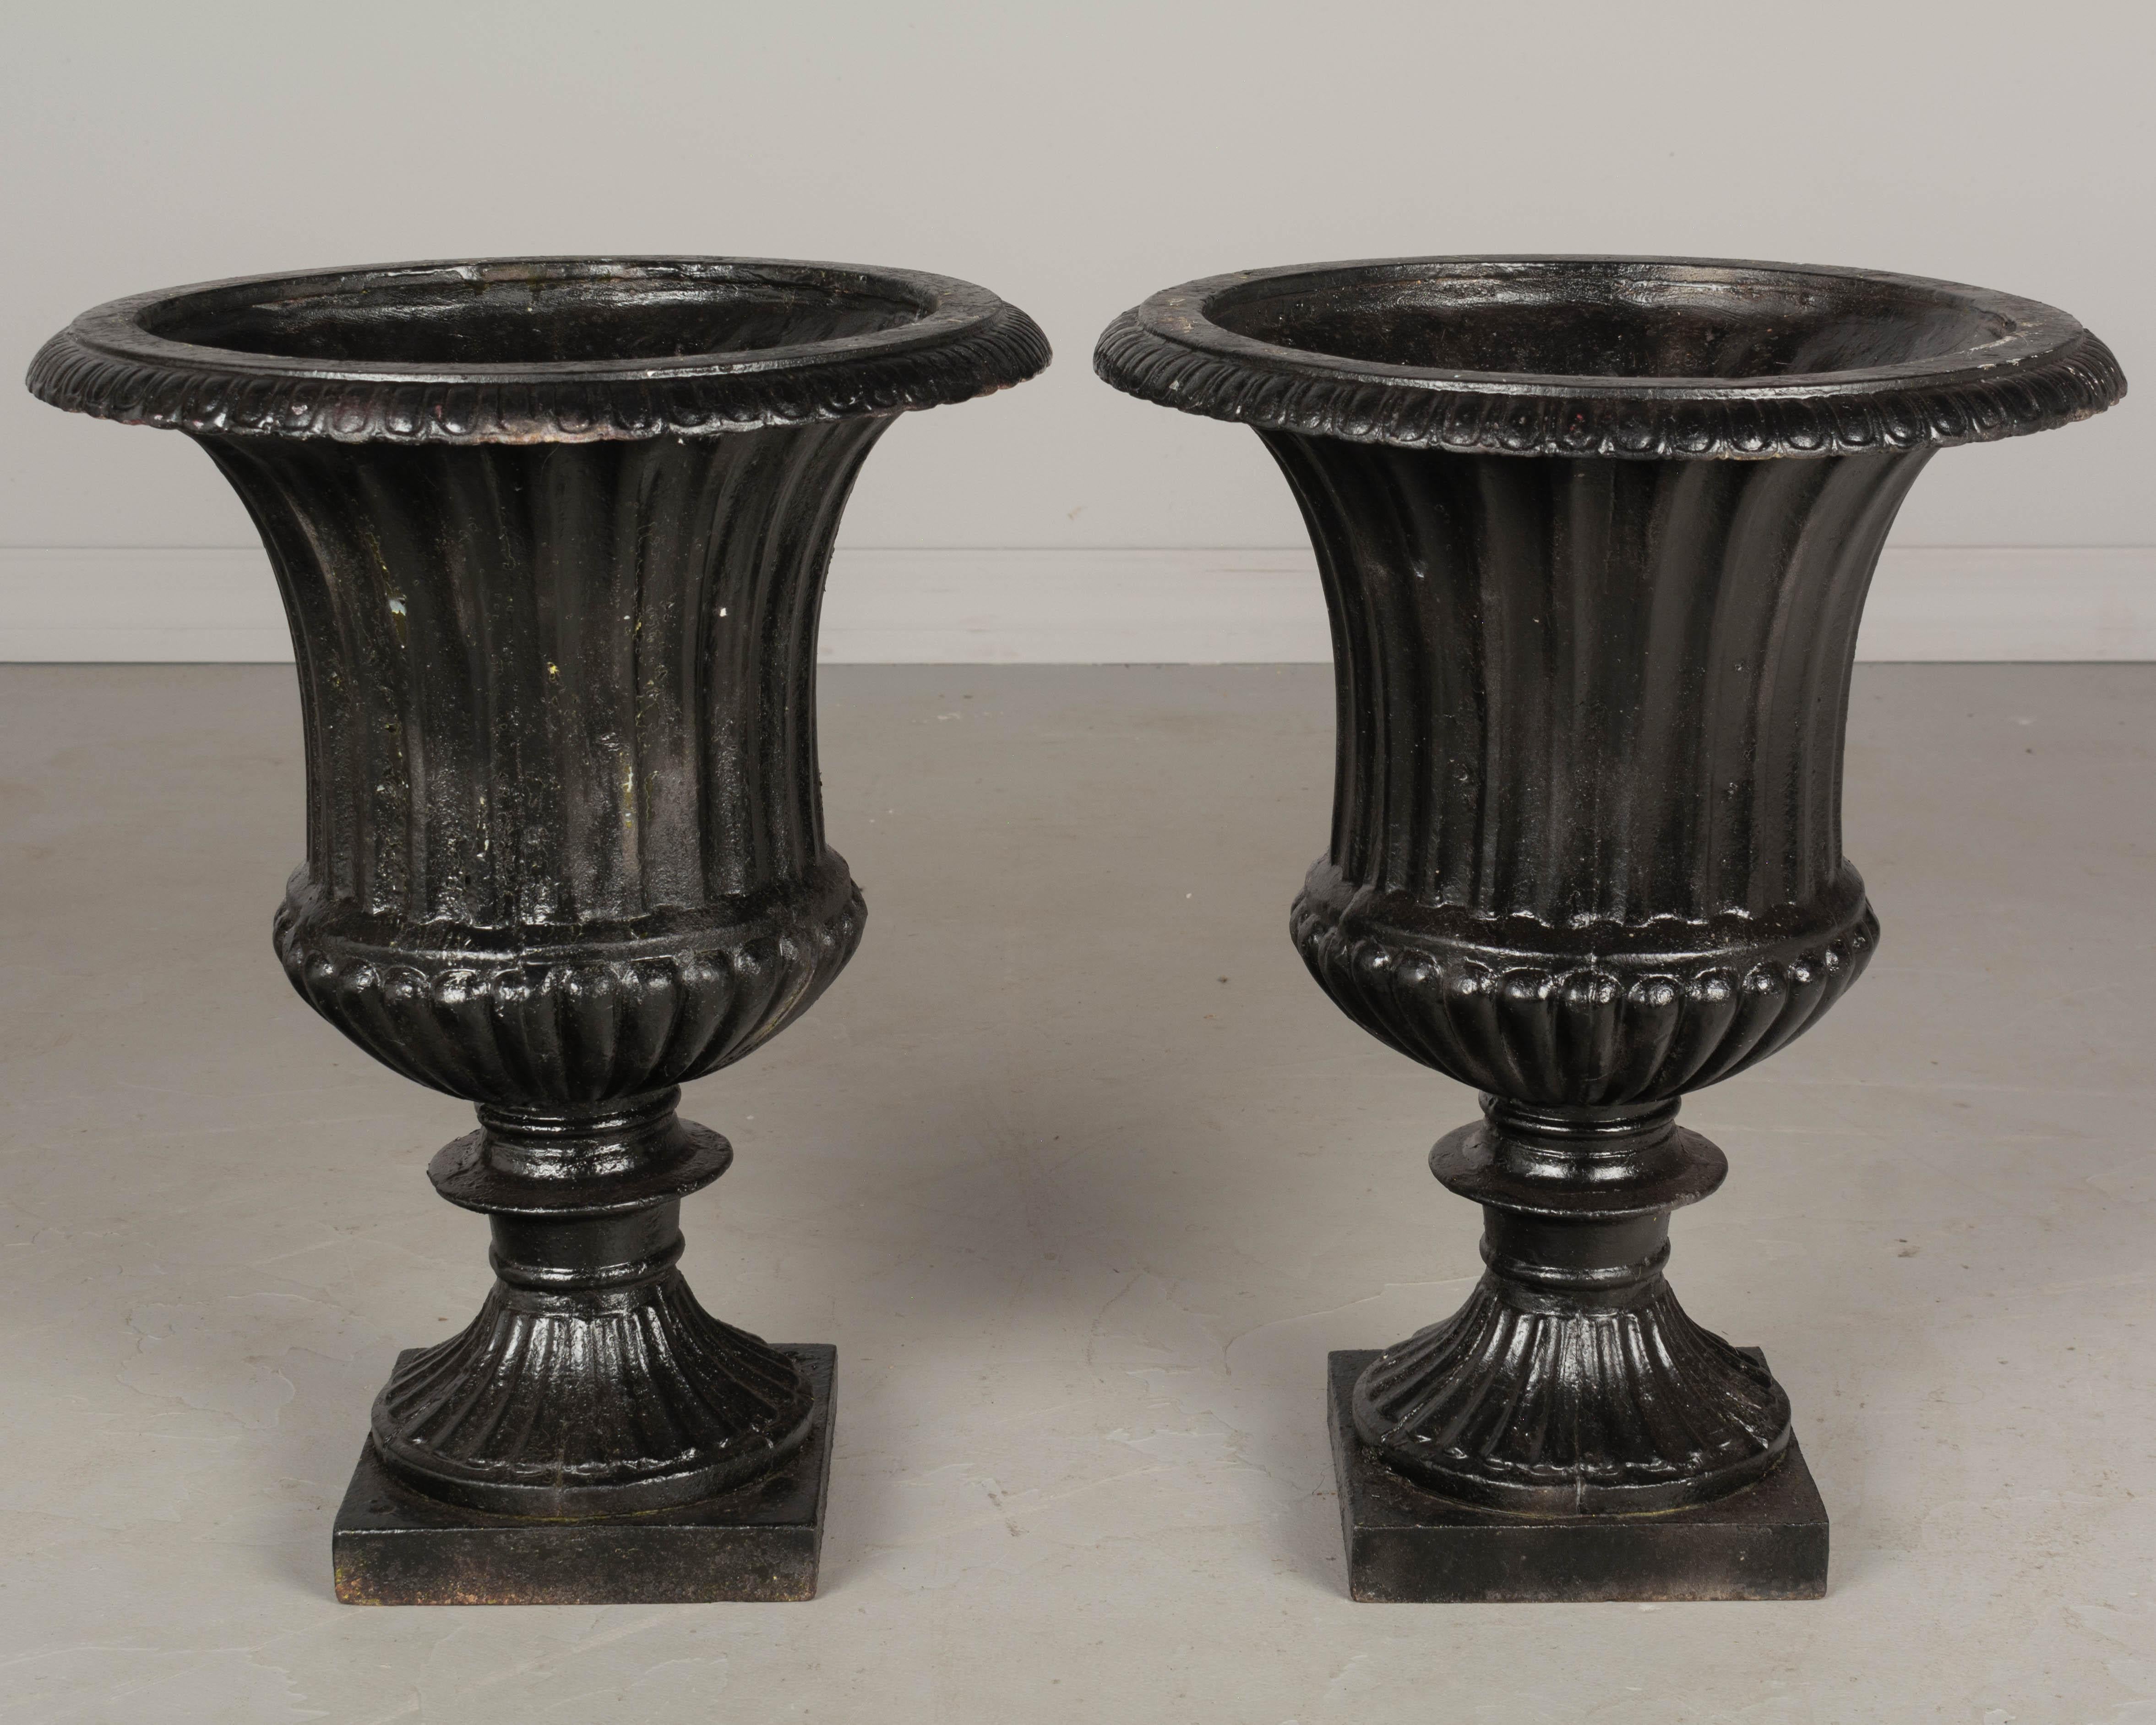 A pair of 19th century French cast iron Medicis garden urn planters with black painted patina. Tall proportions with flared fluted form and pedestal base. Circa 1870-1880. 
Weight: 37.6 lbs. each
19